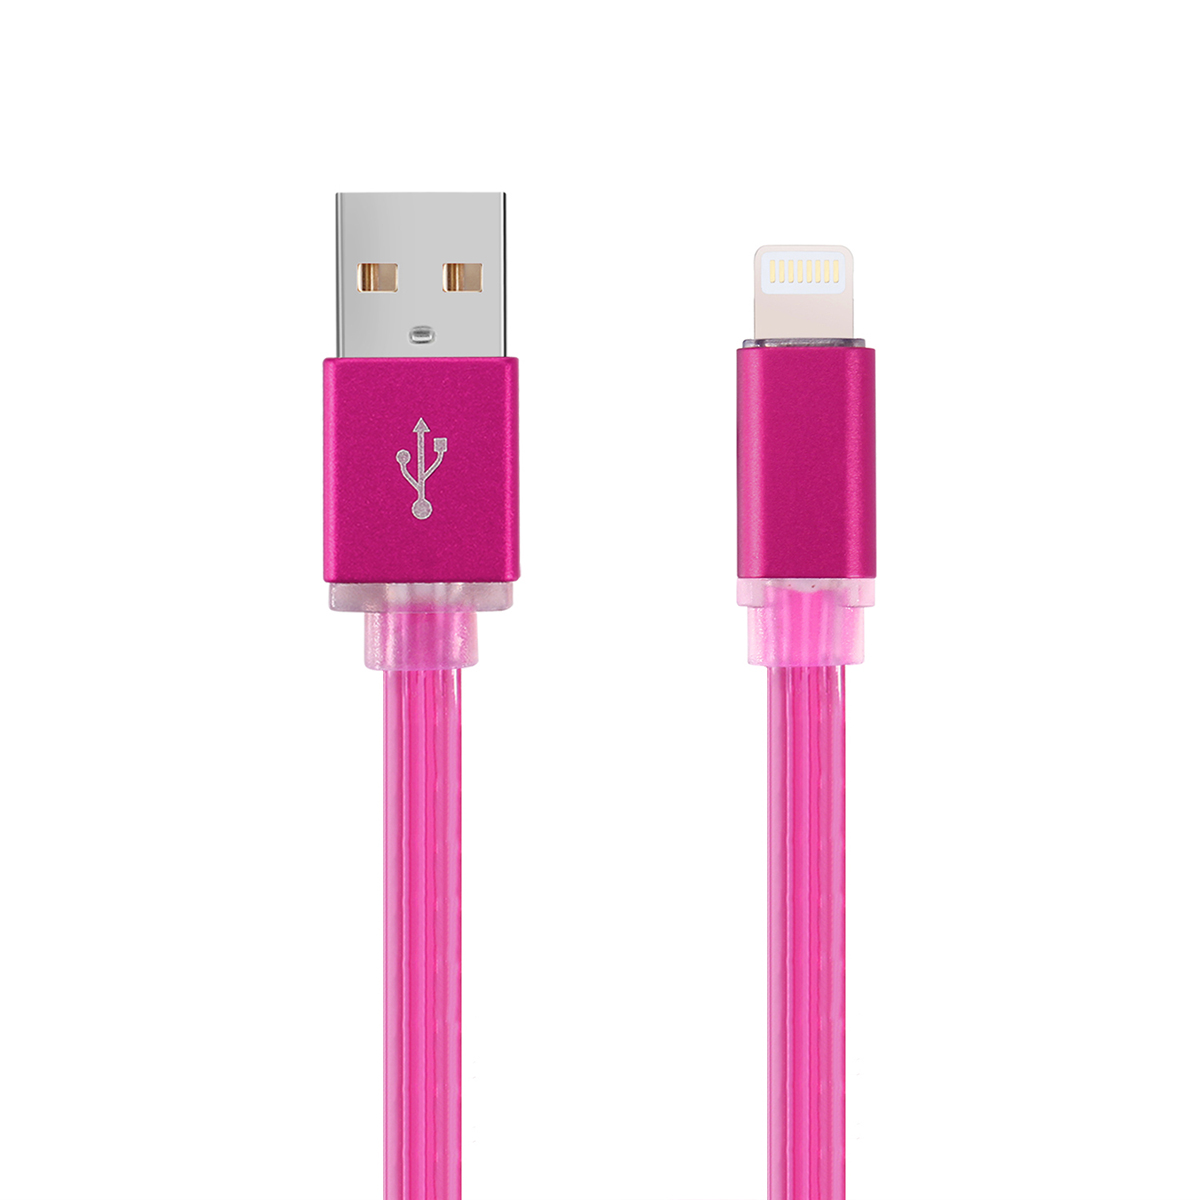 LED 8 pin USB Data Sync Stretche Charging Cable for iPhone 7 - Rose Red